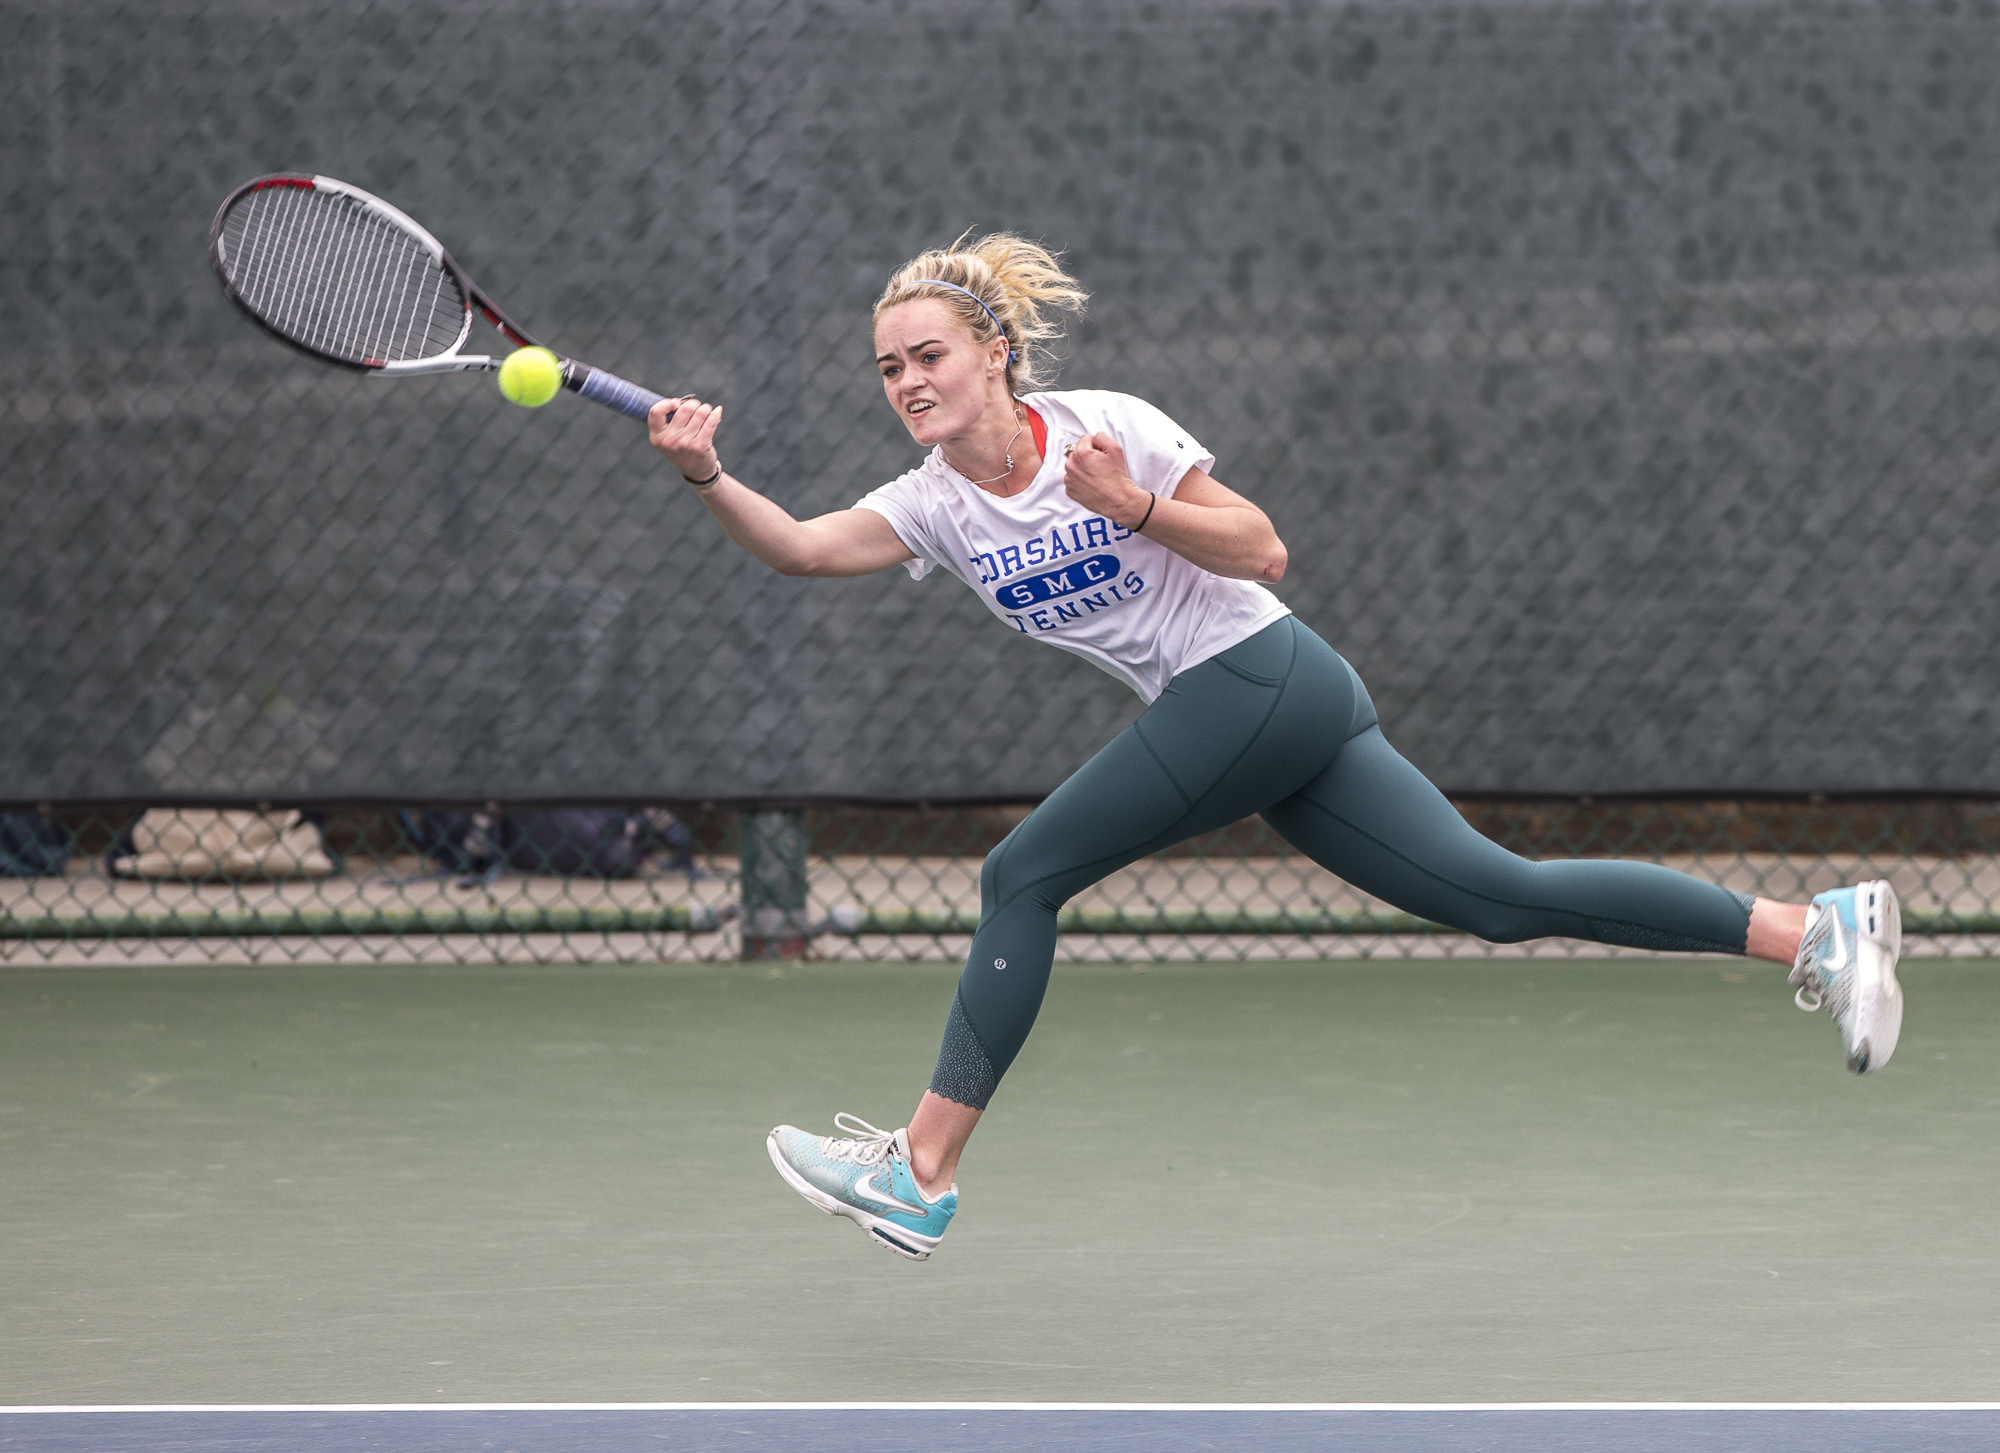  Santa Monica College Corsair sophomore Abby Mullins (#1, doubles) with great reach nails a powerful forehand strike during her doubles match against her Glendale City College Vaquero opponents consisting of sophomore Srna Lepchevska (cq) and sophomo